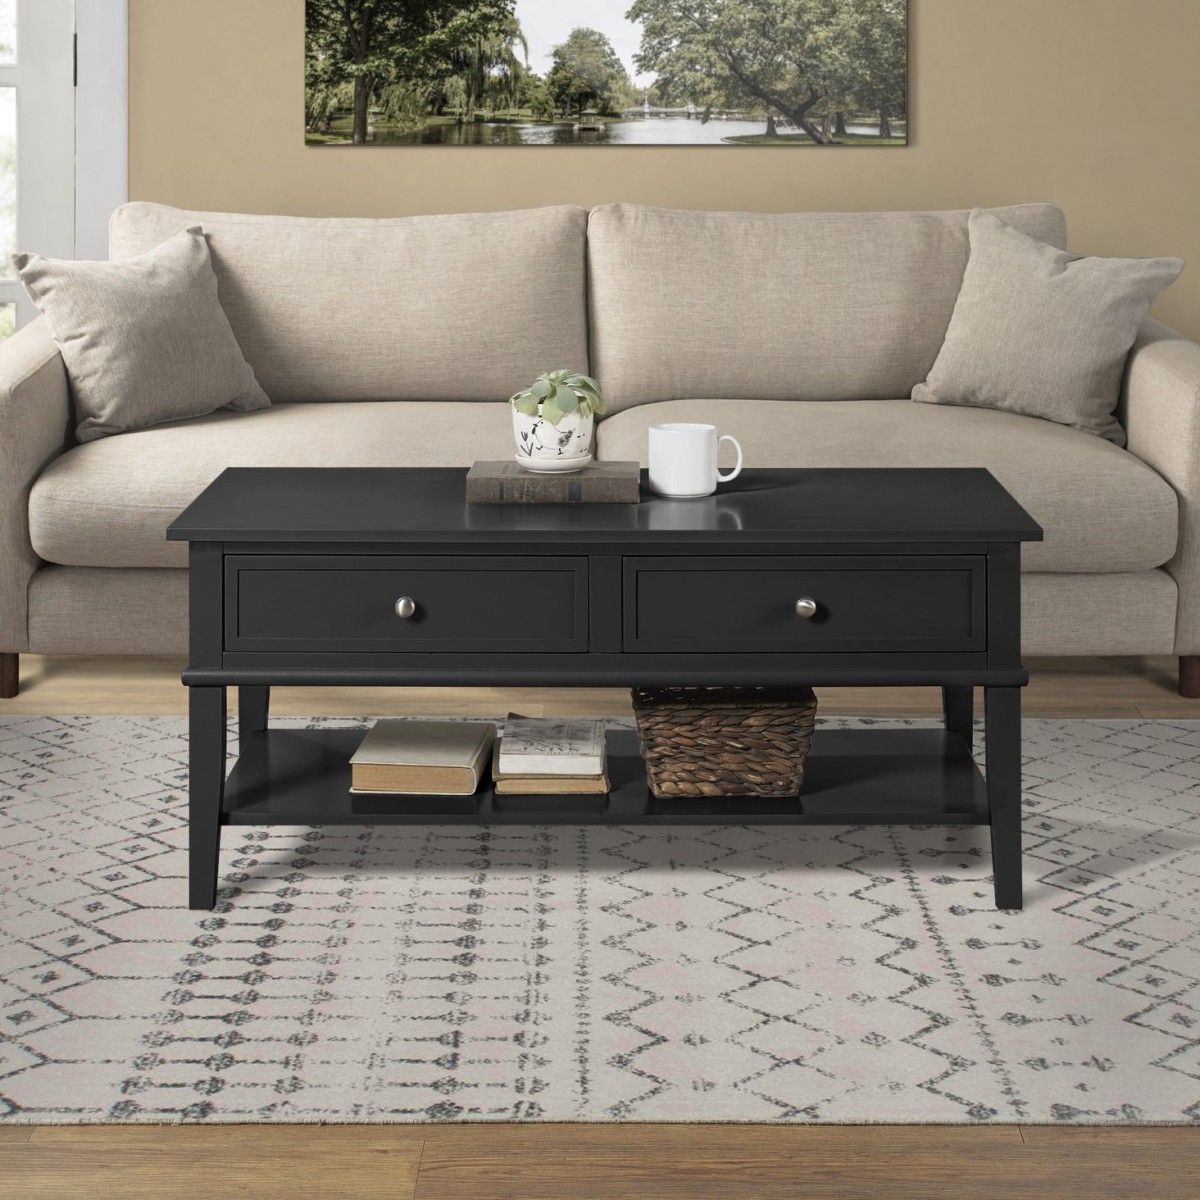 Dorel Franklin Coffee Table Black Grey Or White Painted Wood Regarding Gray And Black Coffee Tables (View 5 of 15)